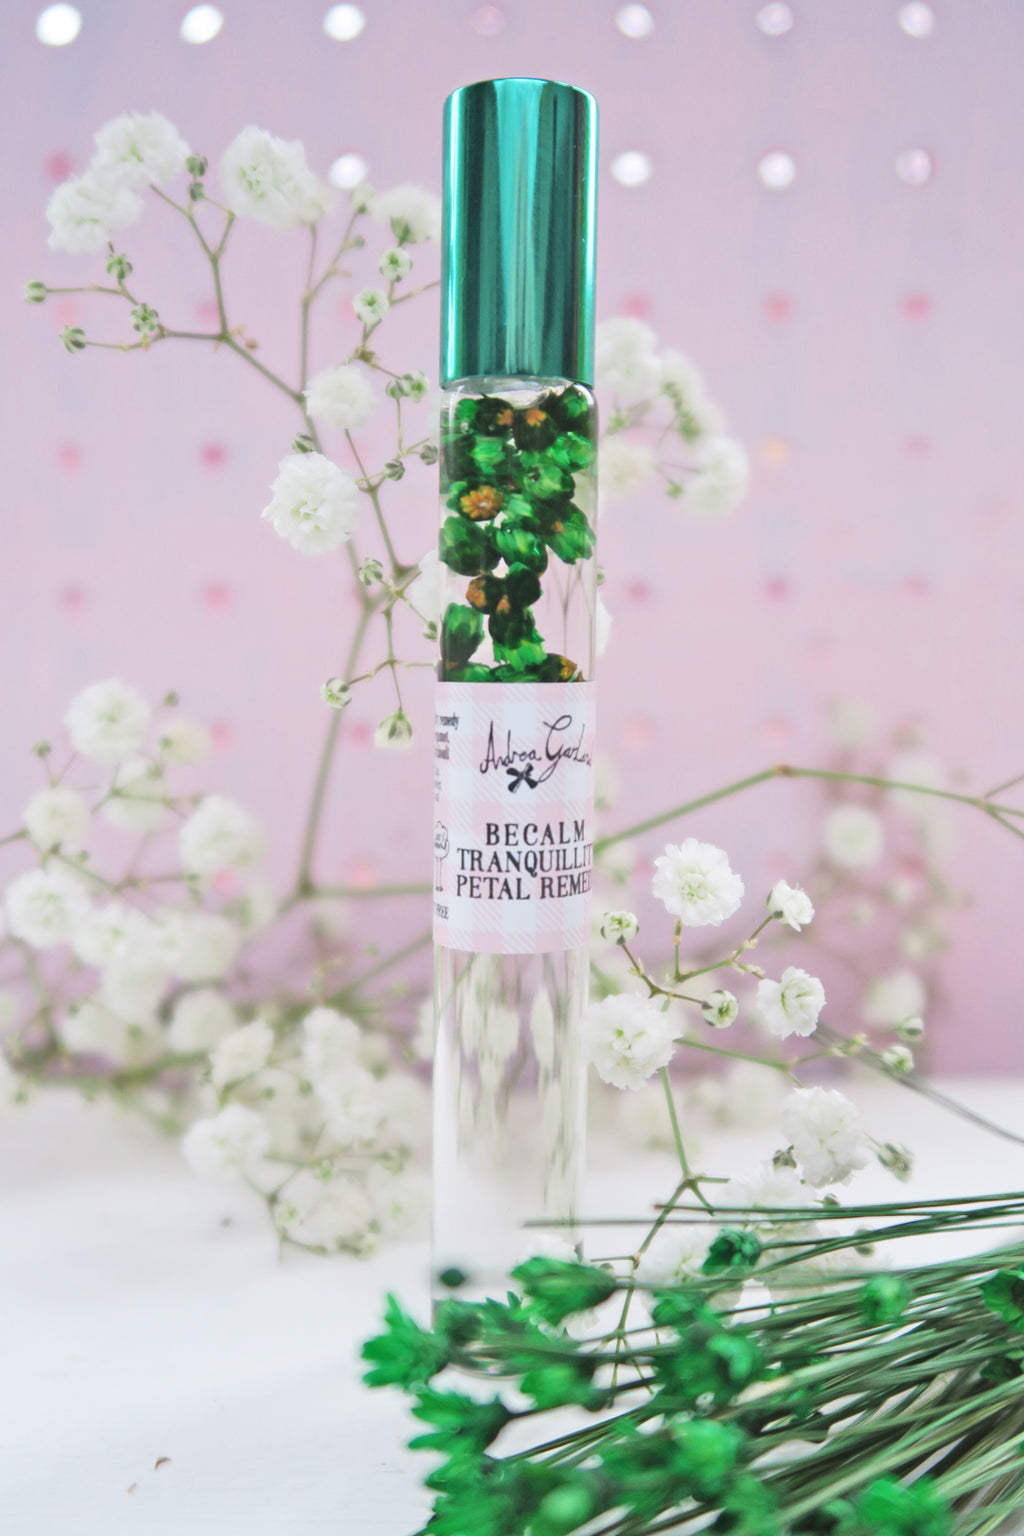 Becalm Floral Petal Tranquility Remedy - Andrea Garland